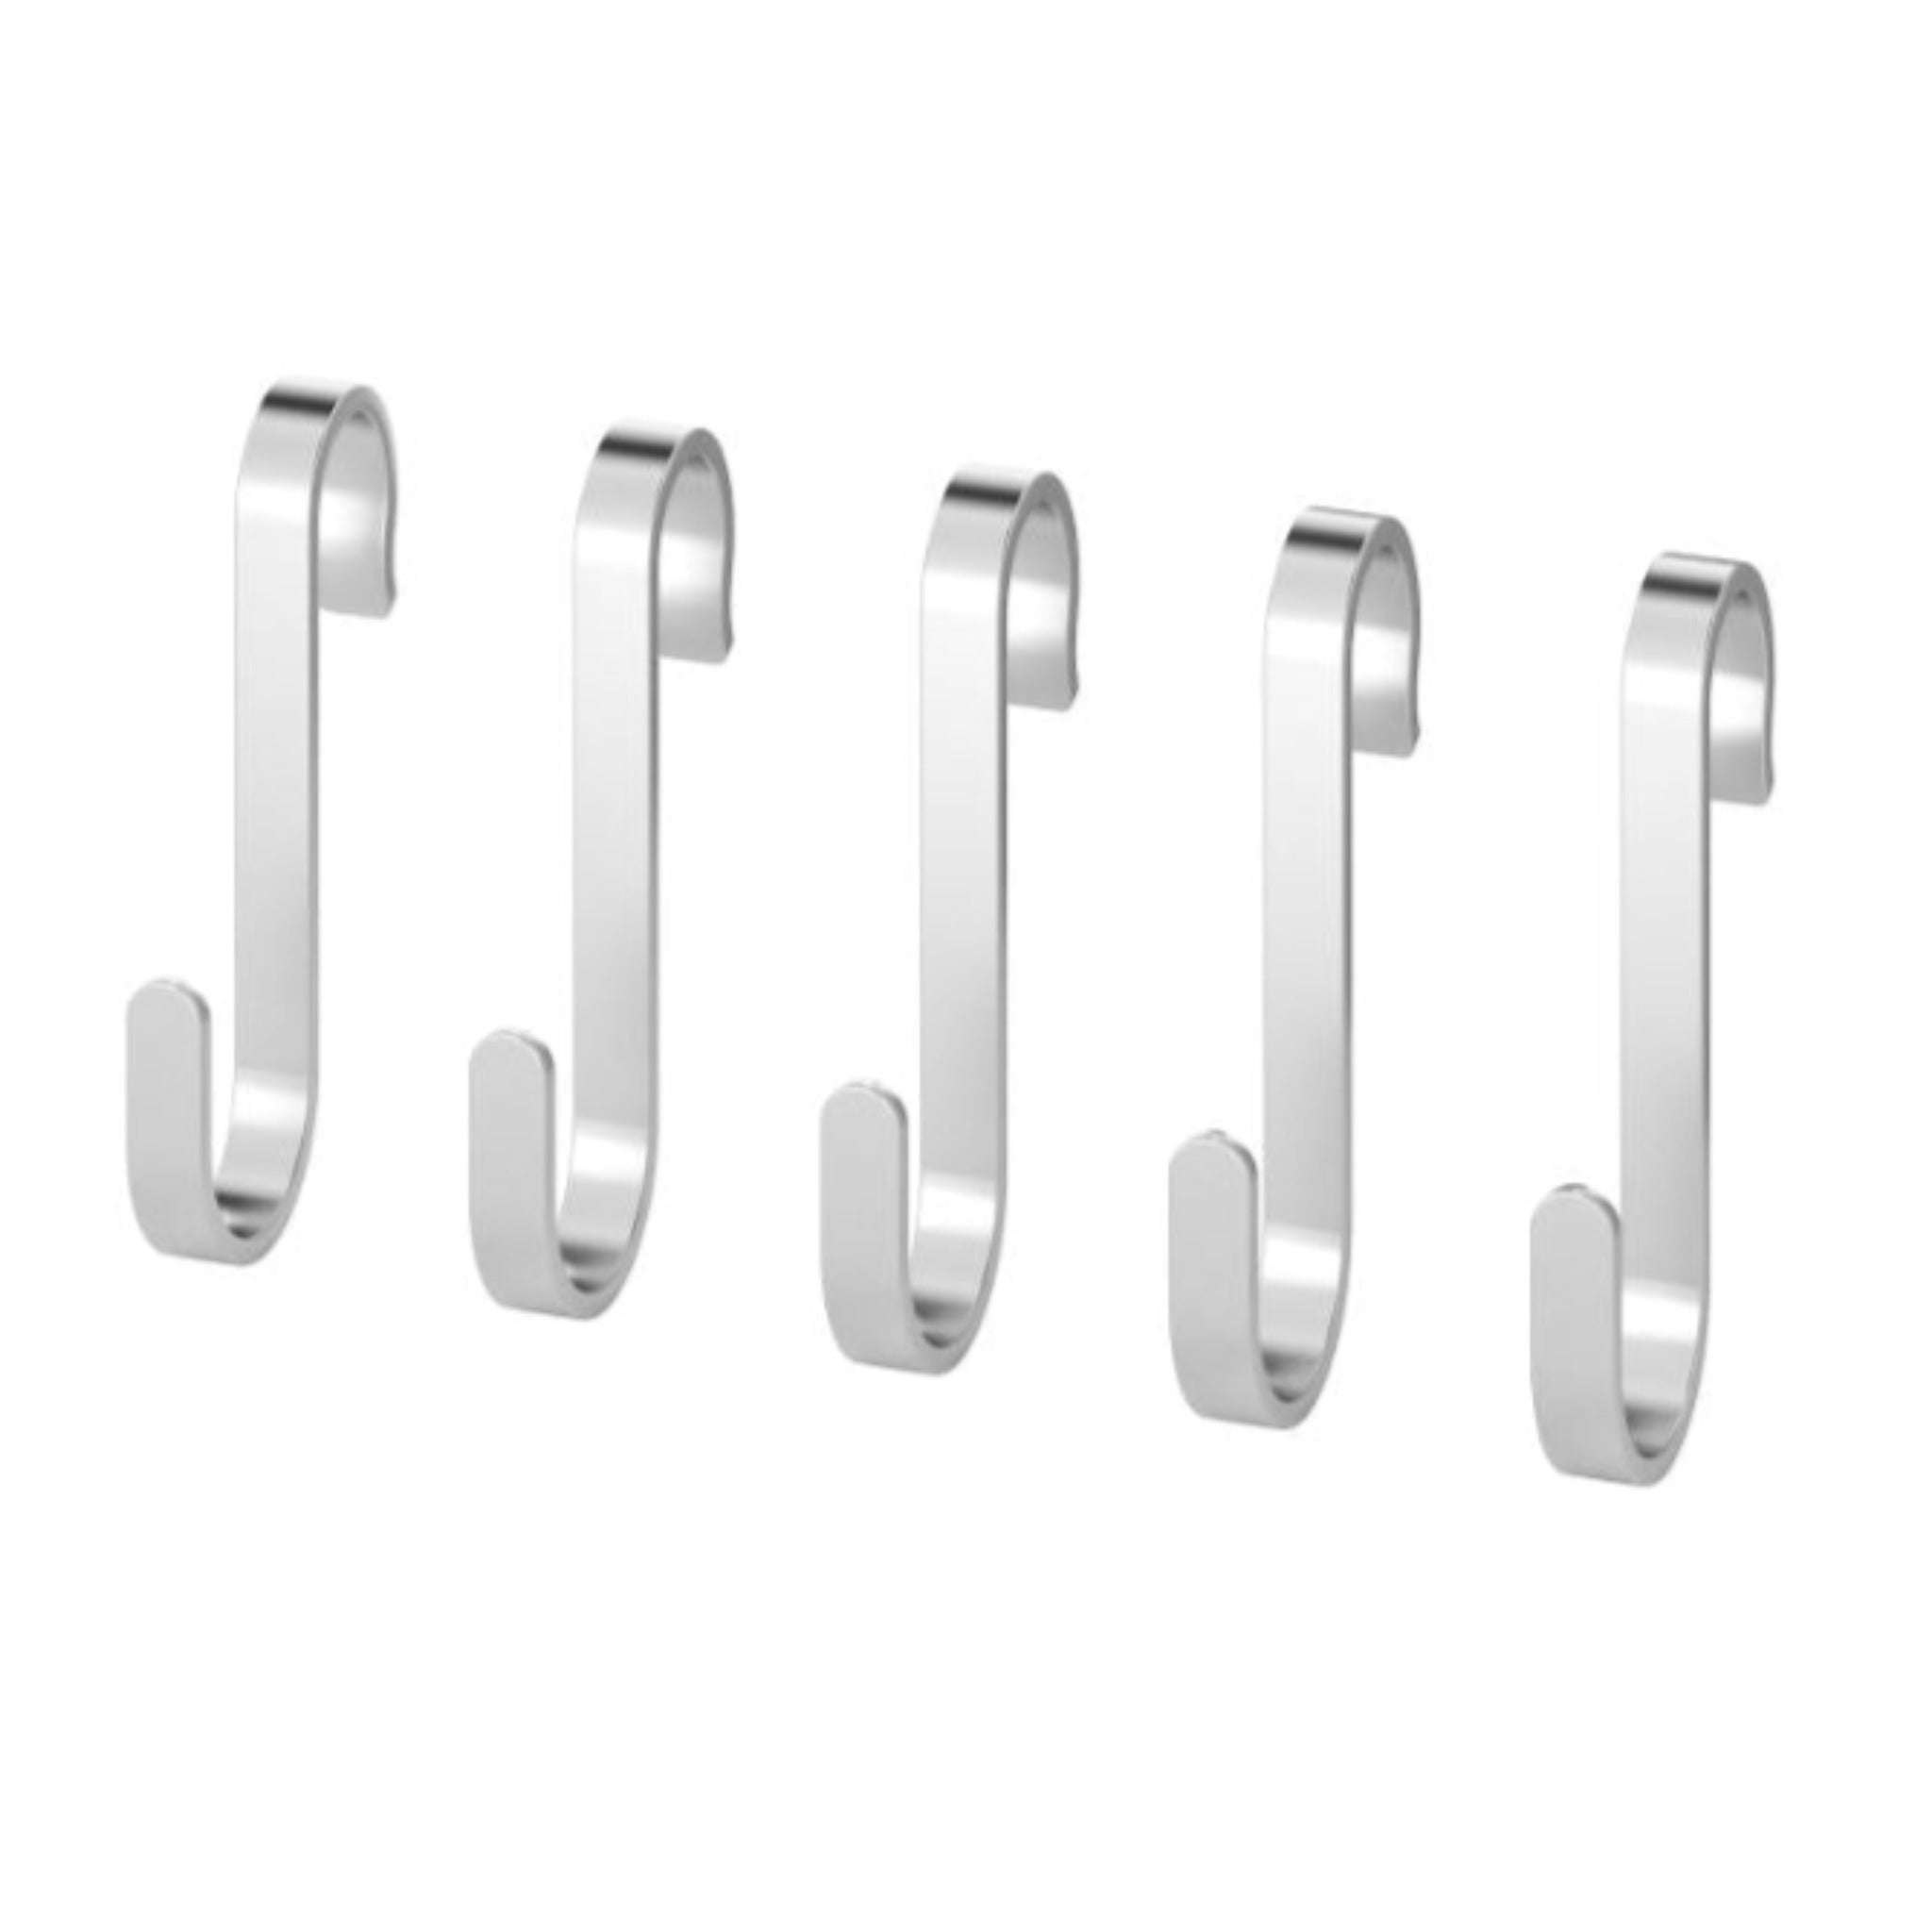 Ikea Kungsfors S S S Hook 5 Pack Nordic Chill